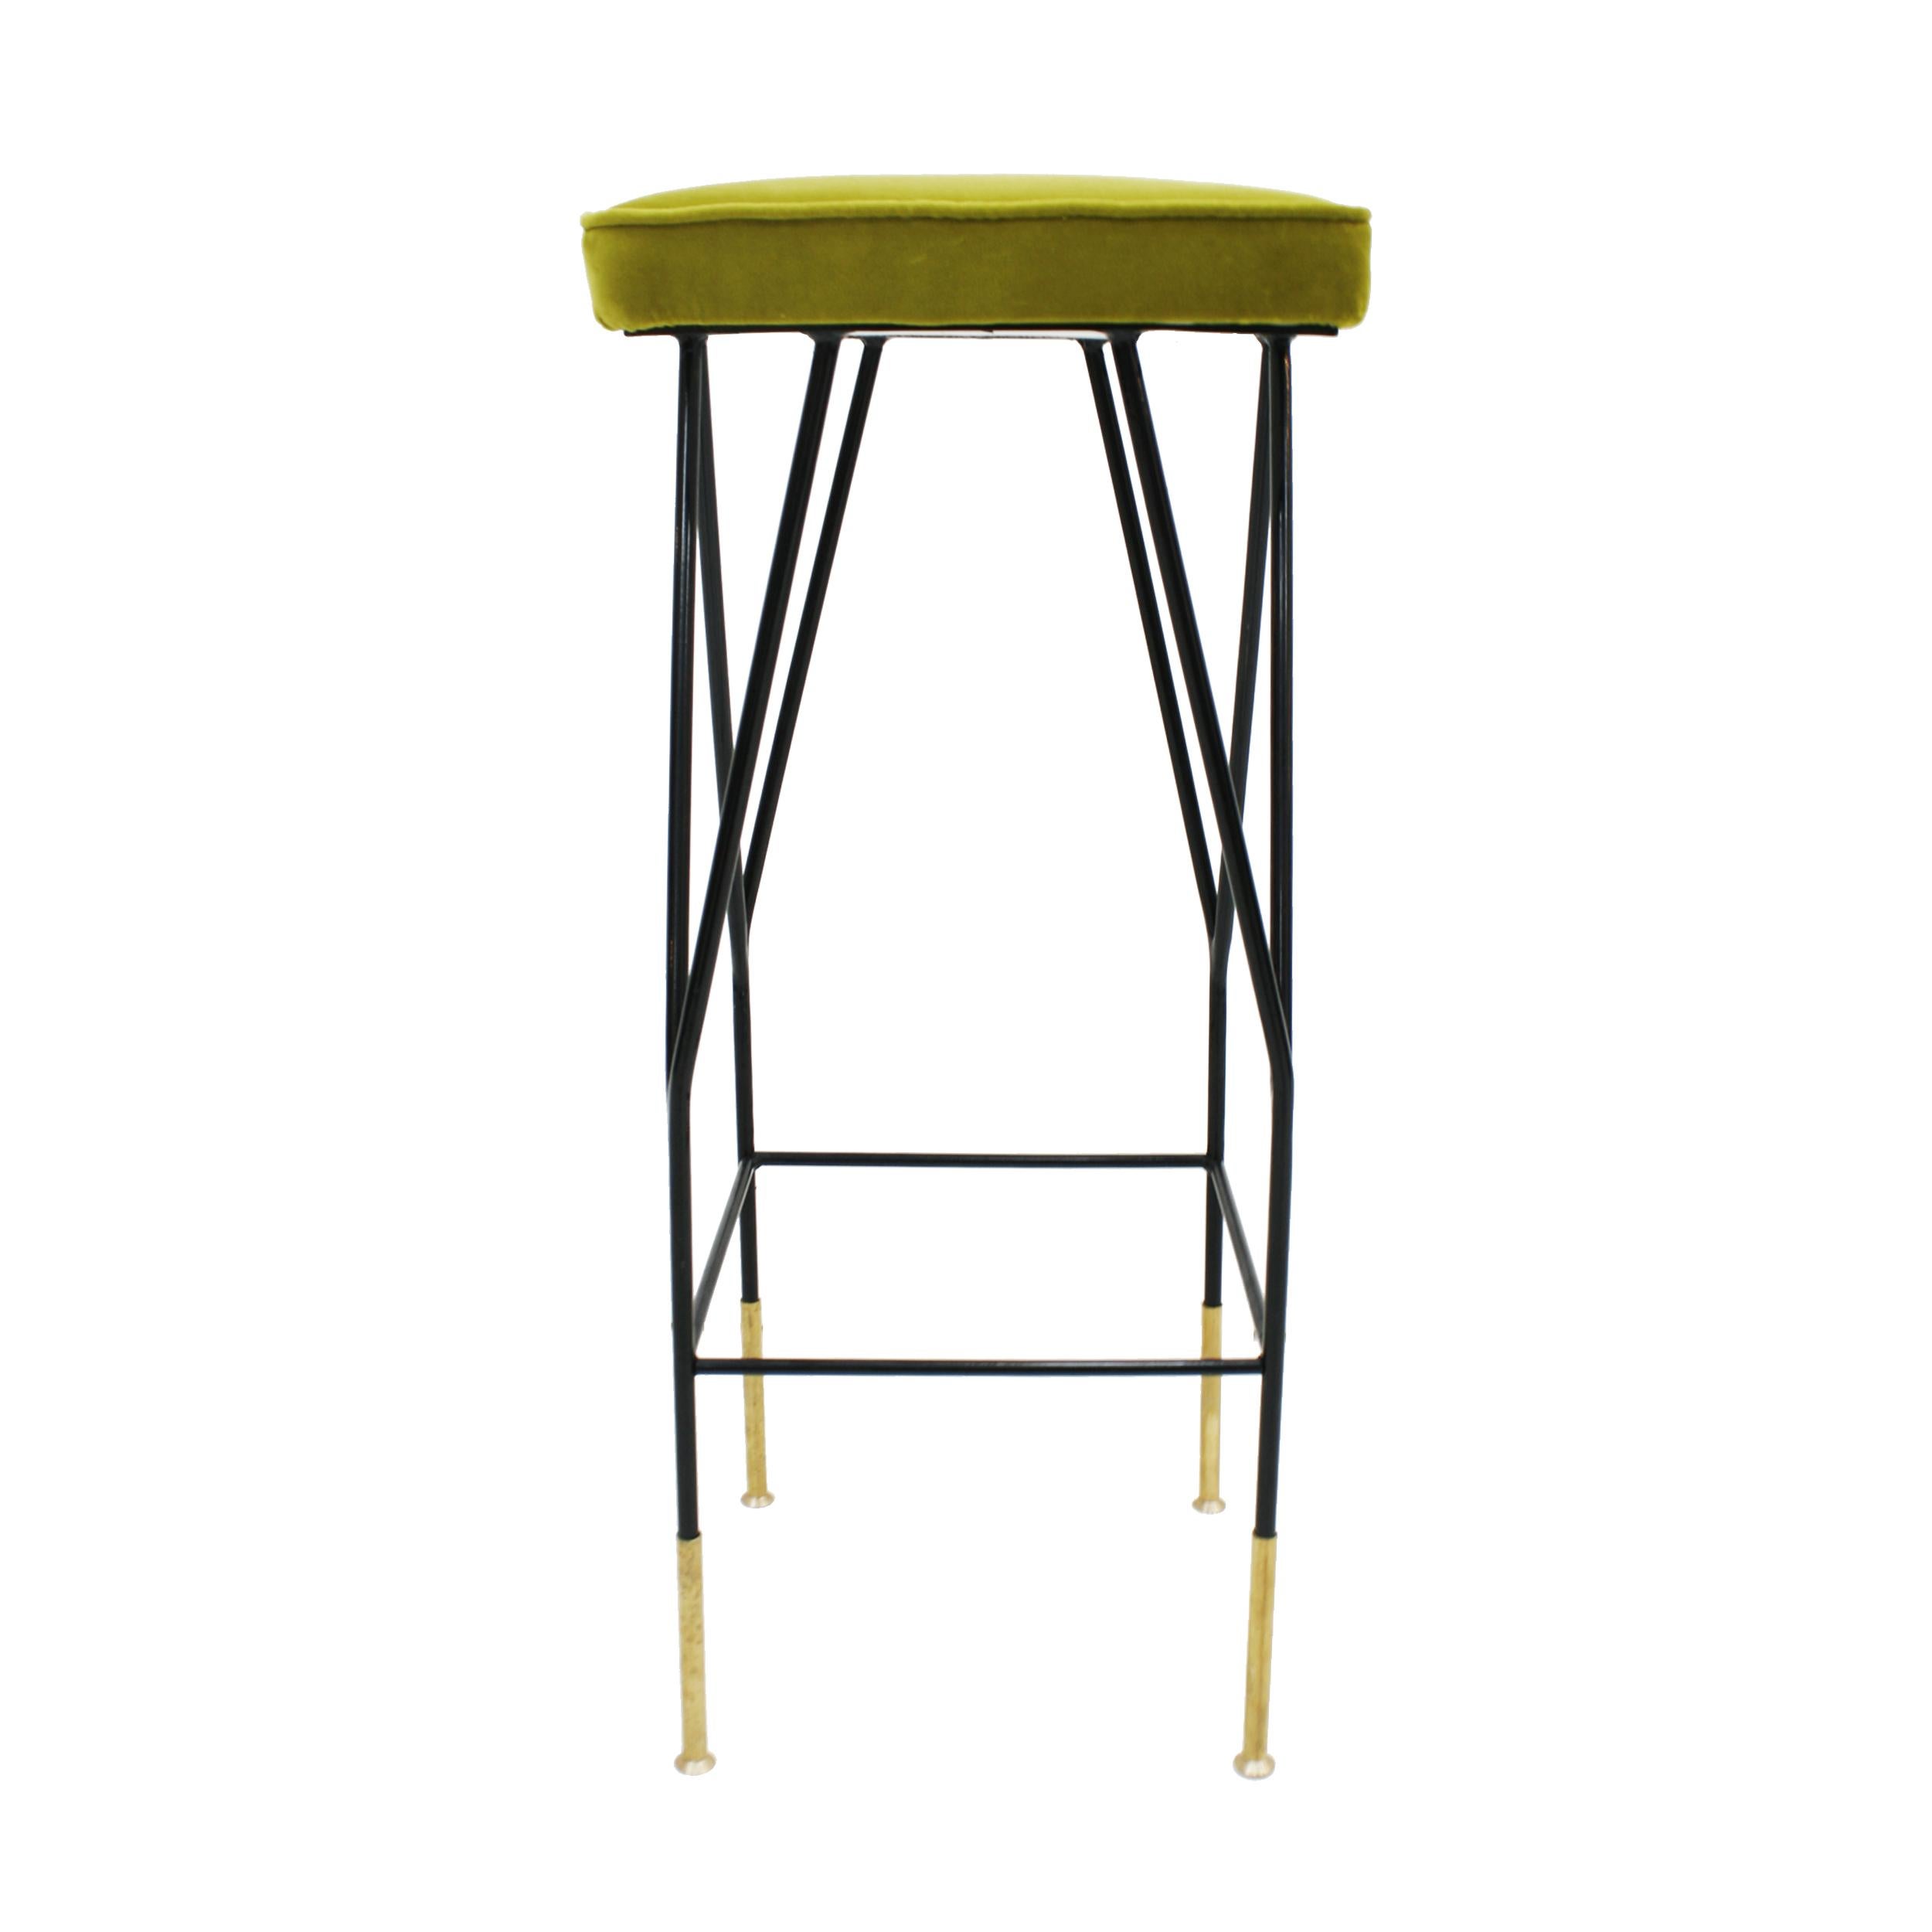 Contemporary Italian Mid-Century Modern Square Black Lacquered Iron Lime Cotton Velvet Stool For Sale